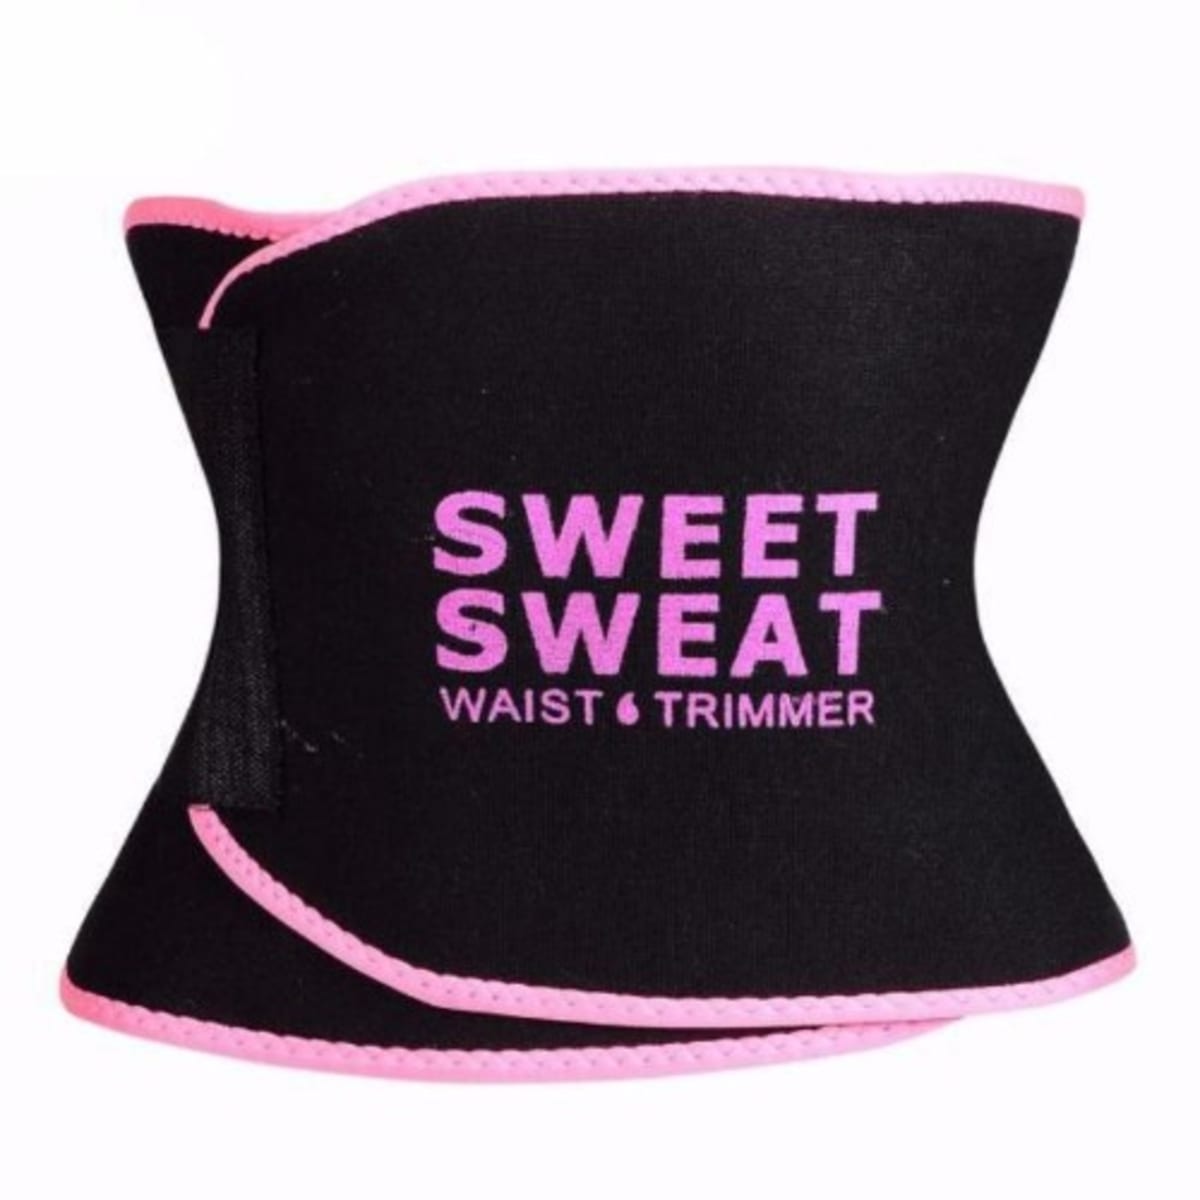 Waist Trainer Long Belt Tummy Wrap Slimming Belt And Free Skipping Rope